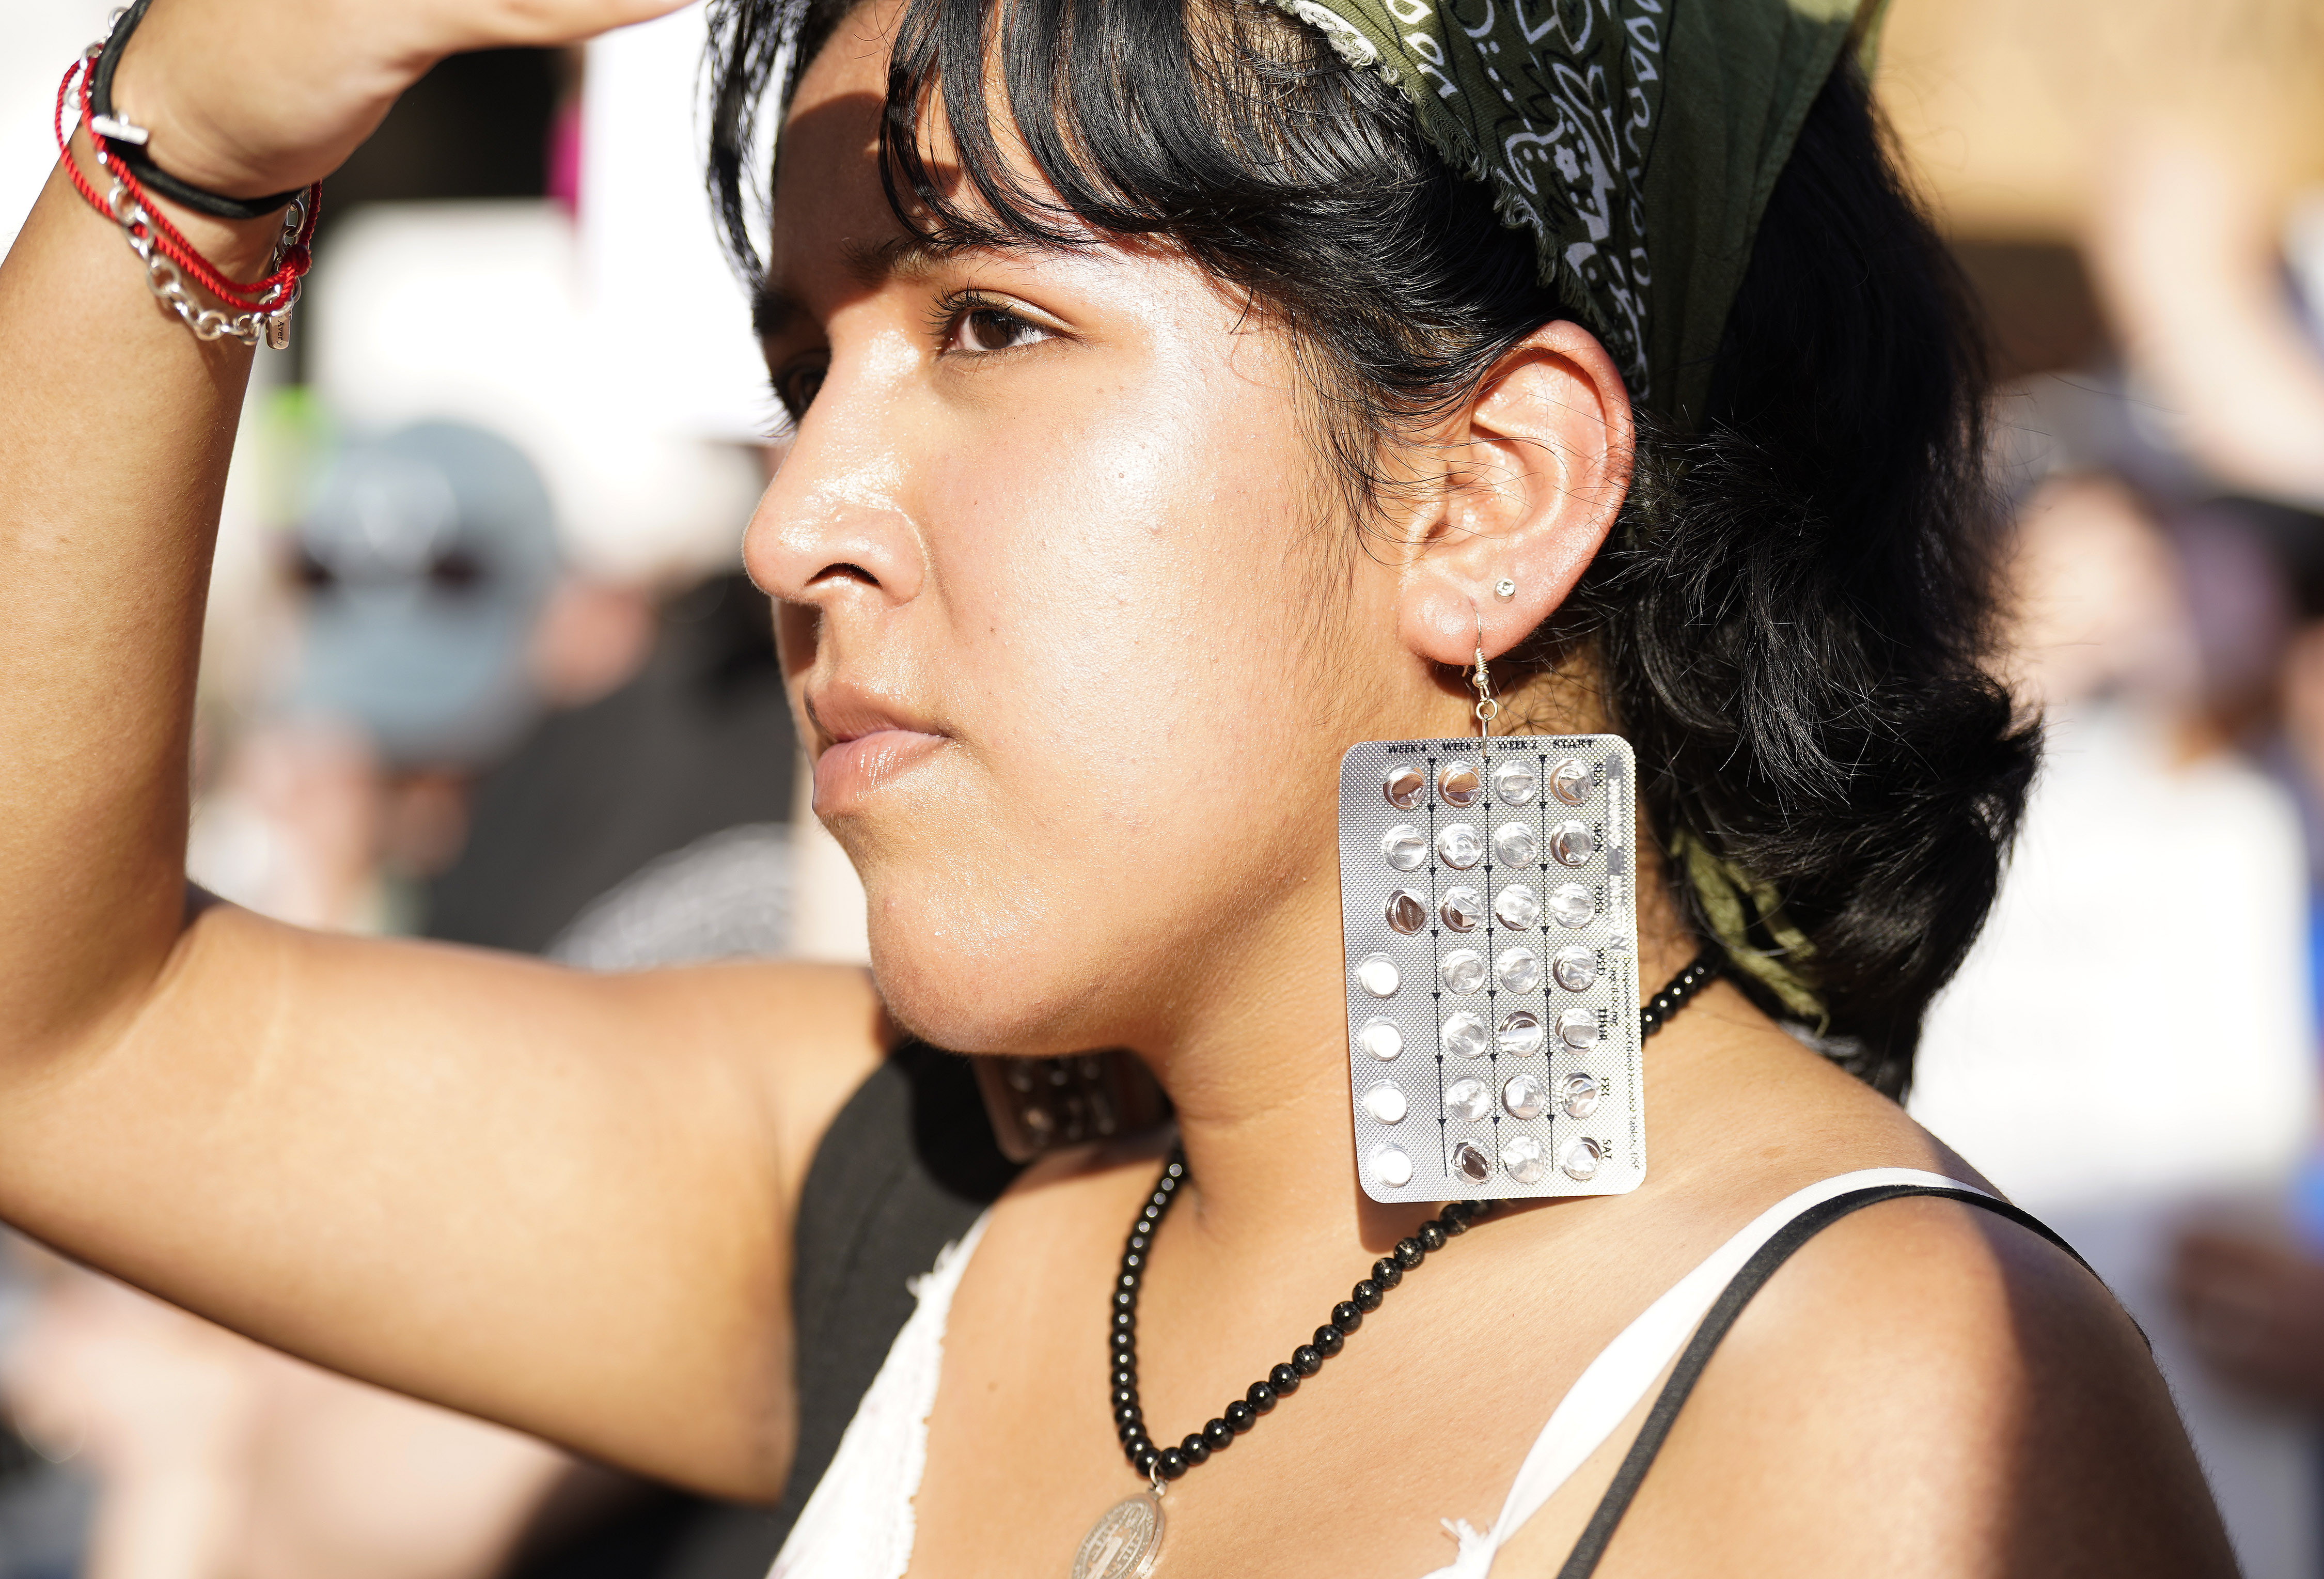 An abortion rights protester wears earings made out of birth control pills.